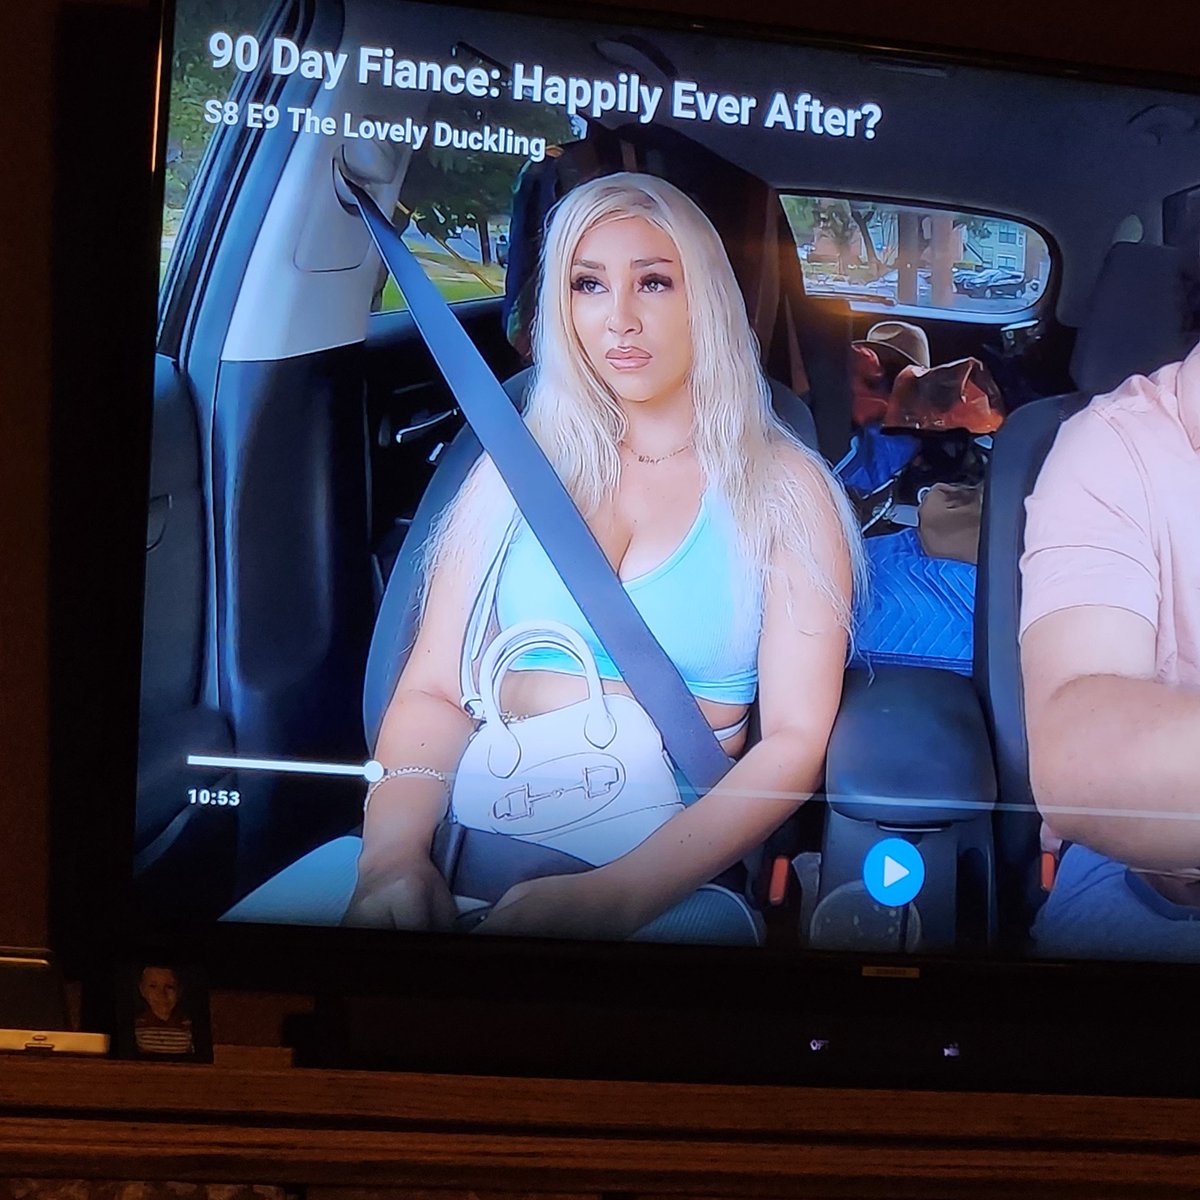 Sophie's purse is also buckled up and safe! 😂 #90DayFiance @90DayFiance